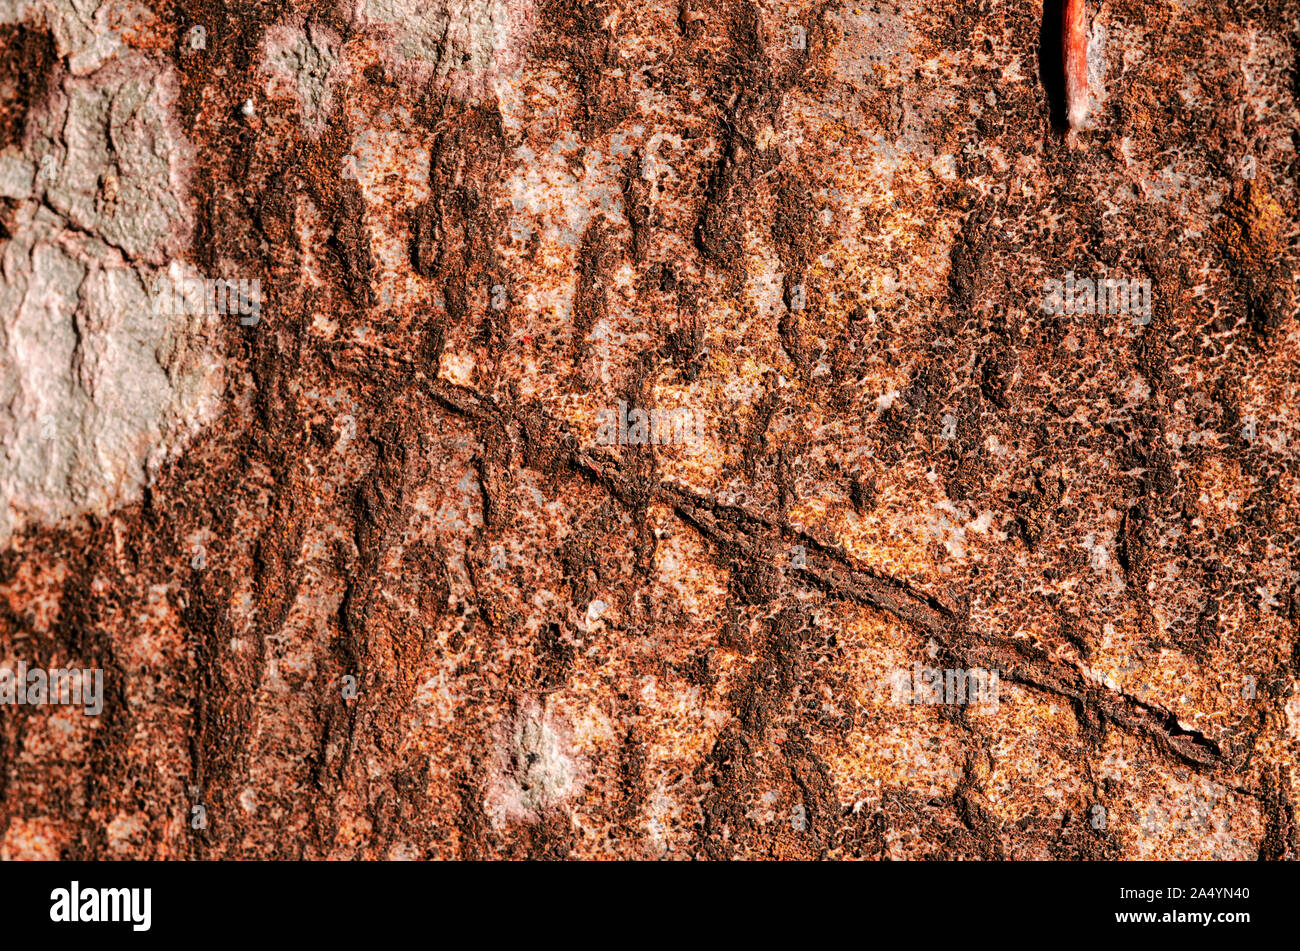 Horizontal version of a beech tree bark close up with scars, cracks, and all its specific surface details. natural light in brown tones Stock Photo